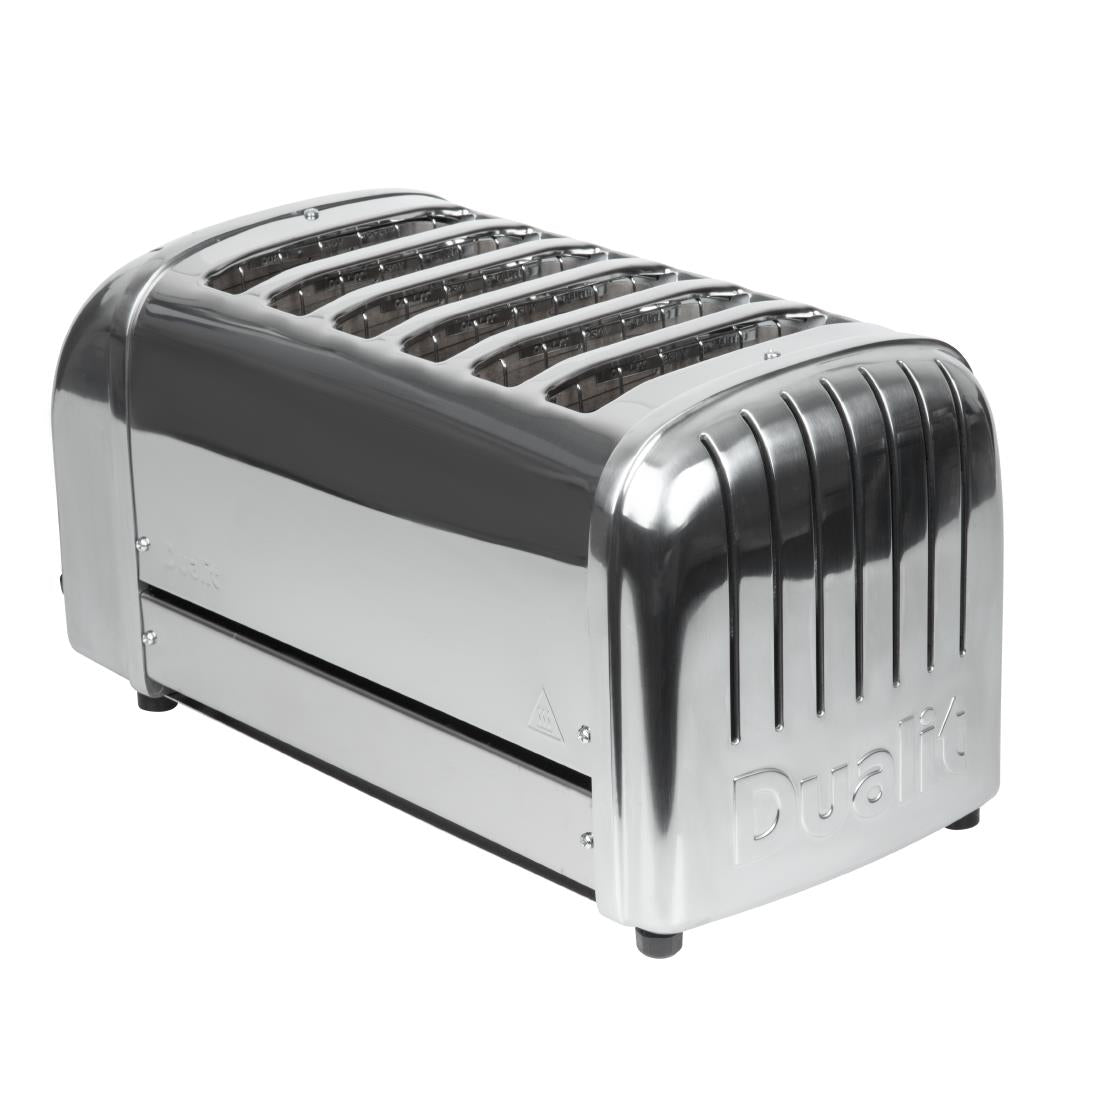 Dualit 6 Slice Vario Toaster Stainless Steel 60144 JD Catering Equipment Solutions Ltd